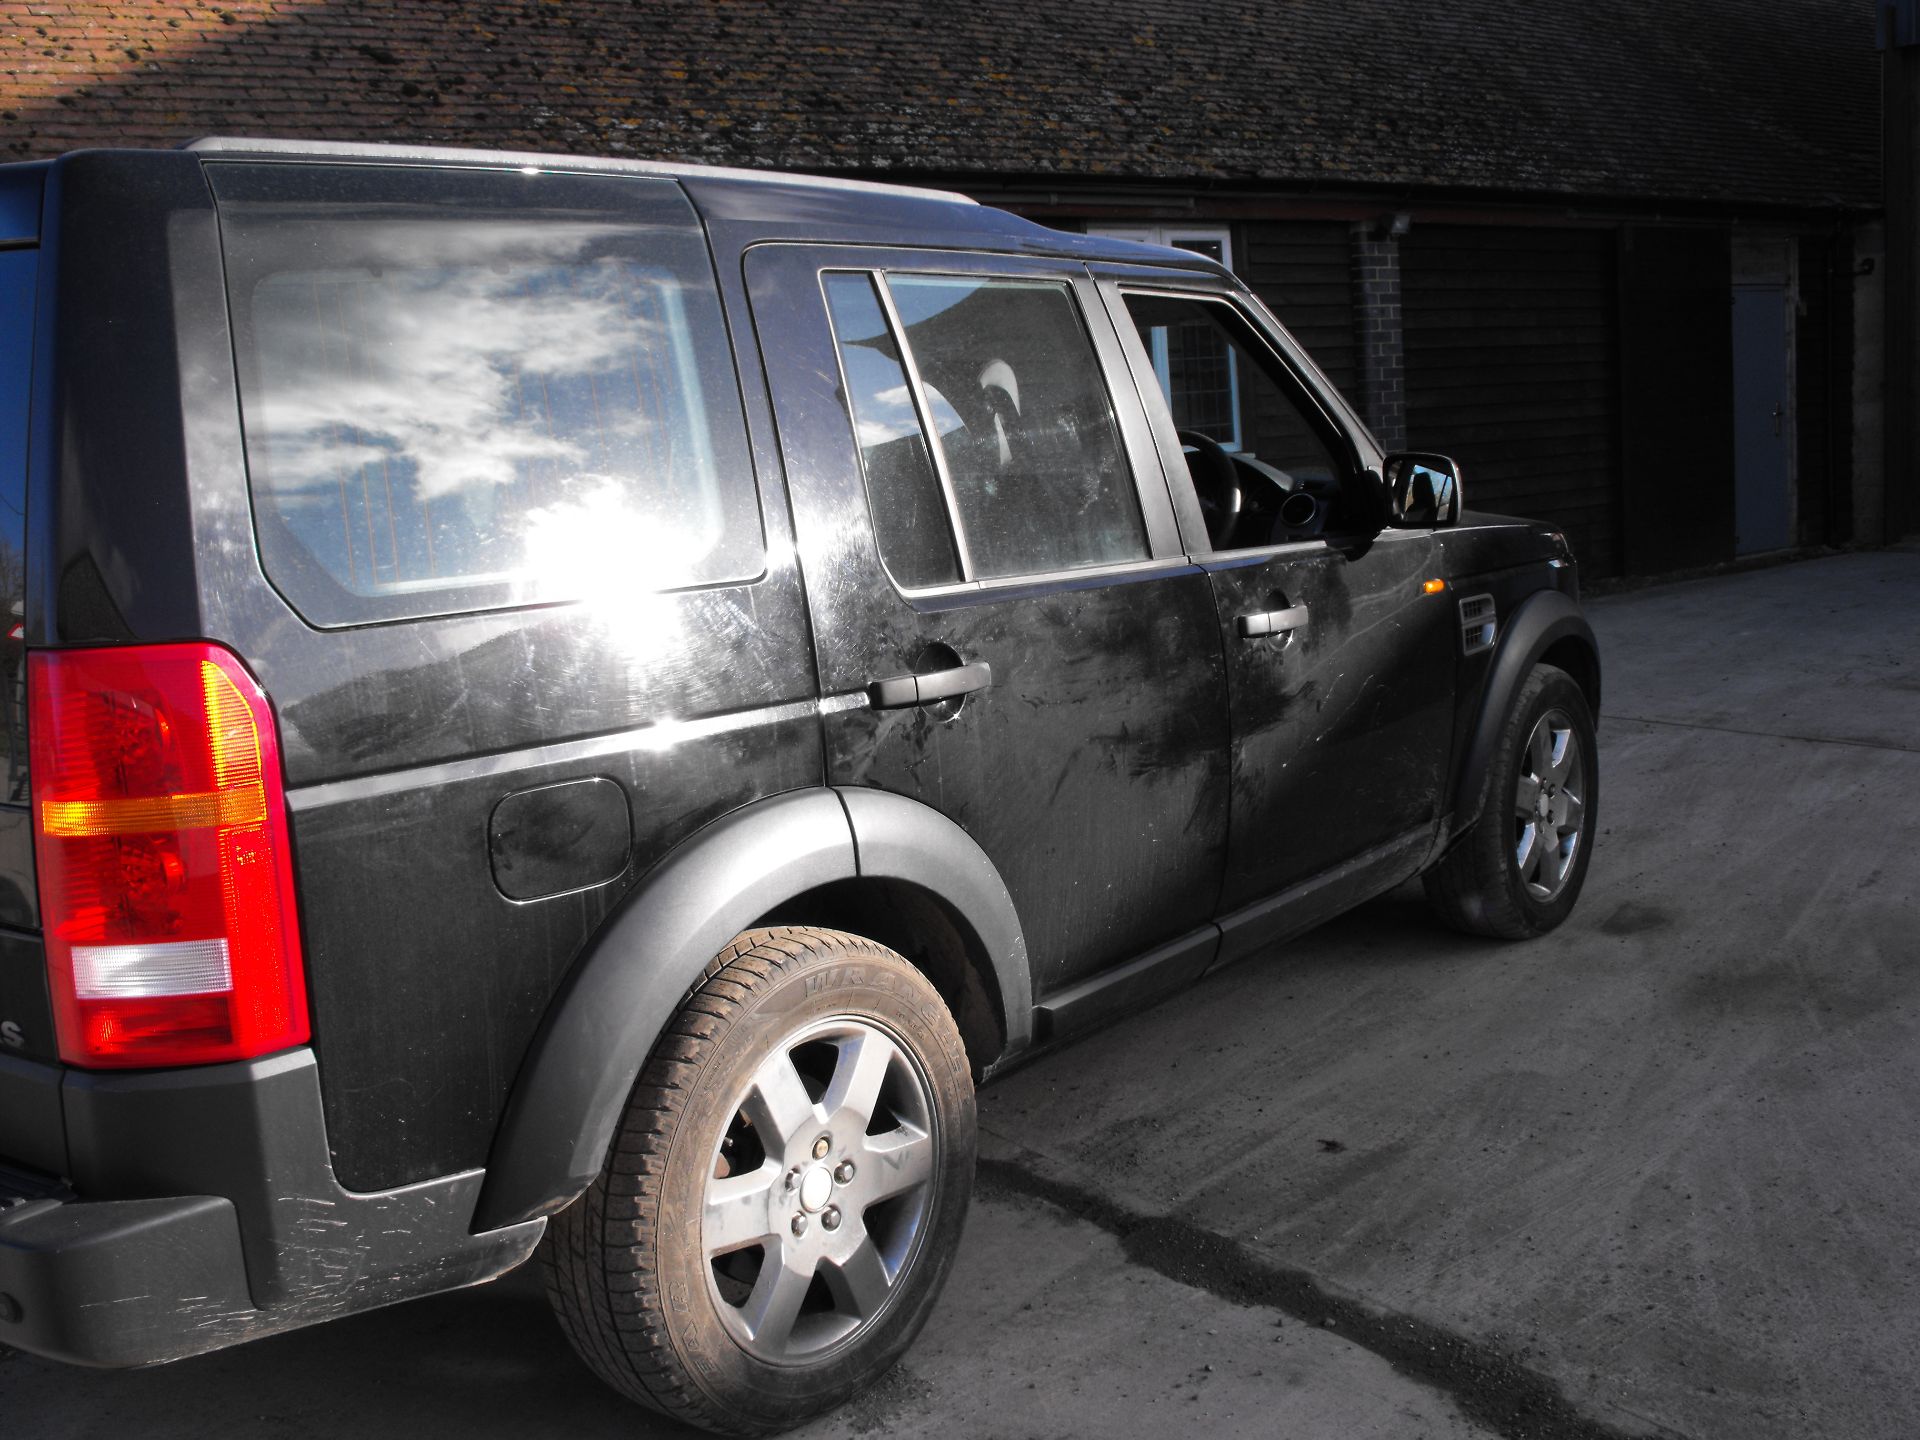 Land Rover Discovery 3 XS TDV6 Auto 2008 - Image 4 of 9